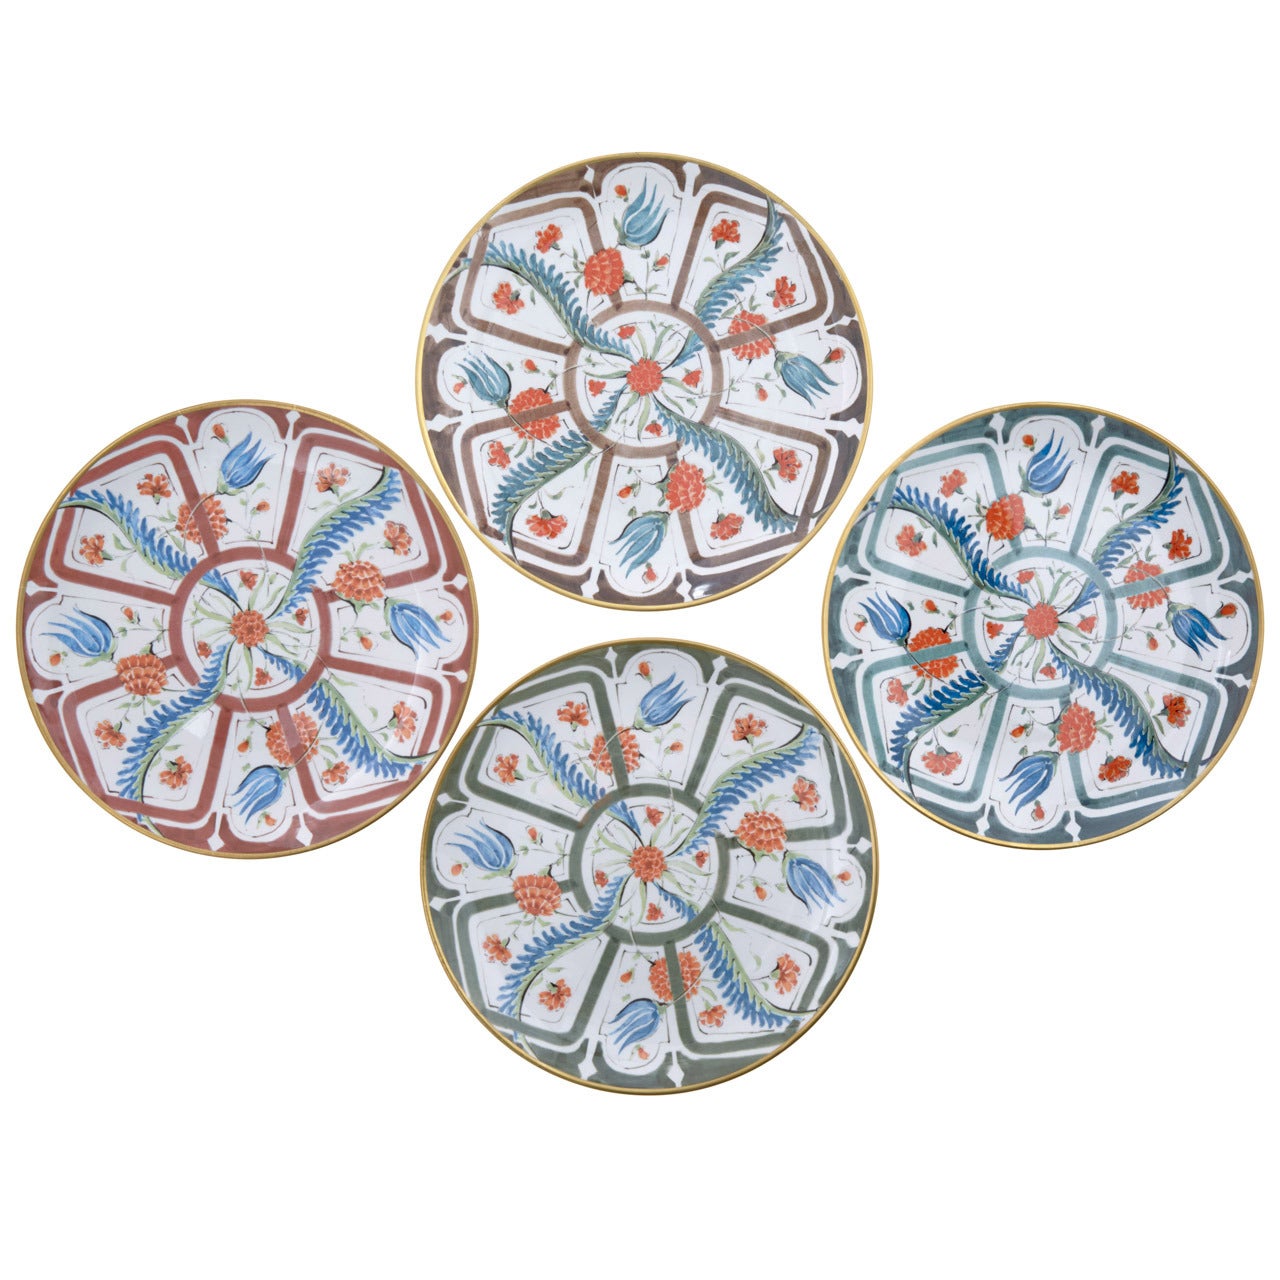 Made to Order Cabana Dinner Set of Plates with Iznik Floral Decorations For Sale